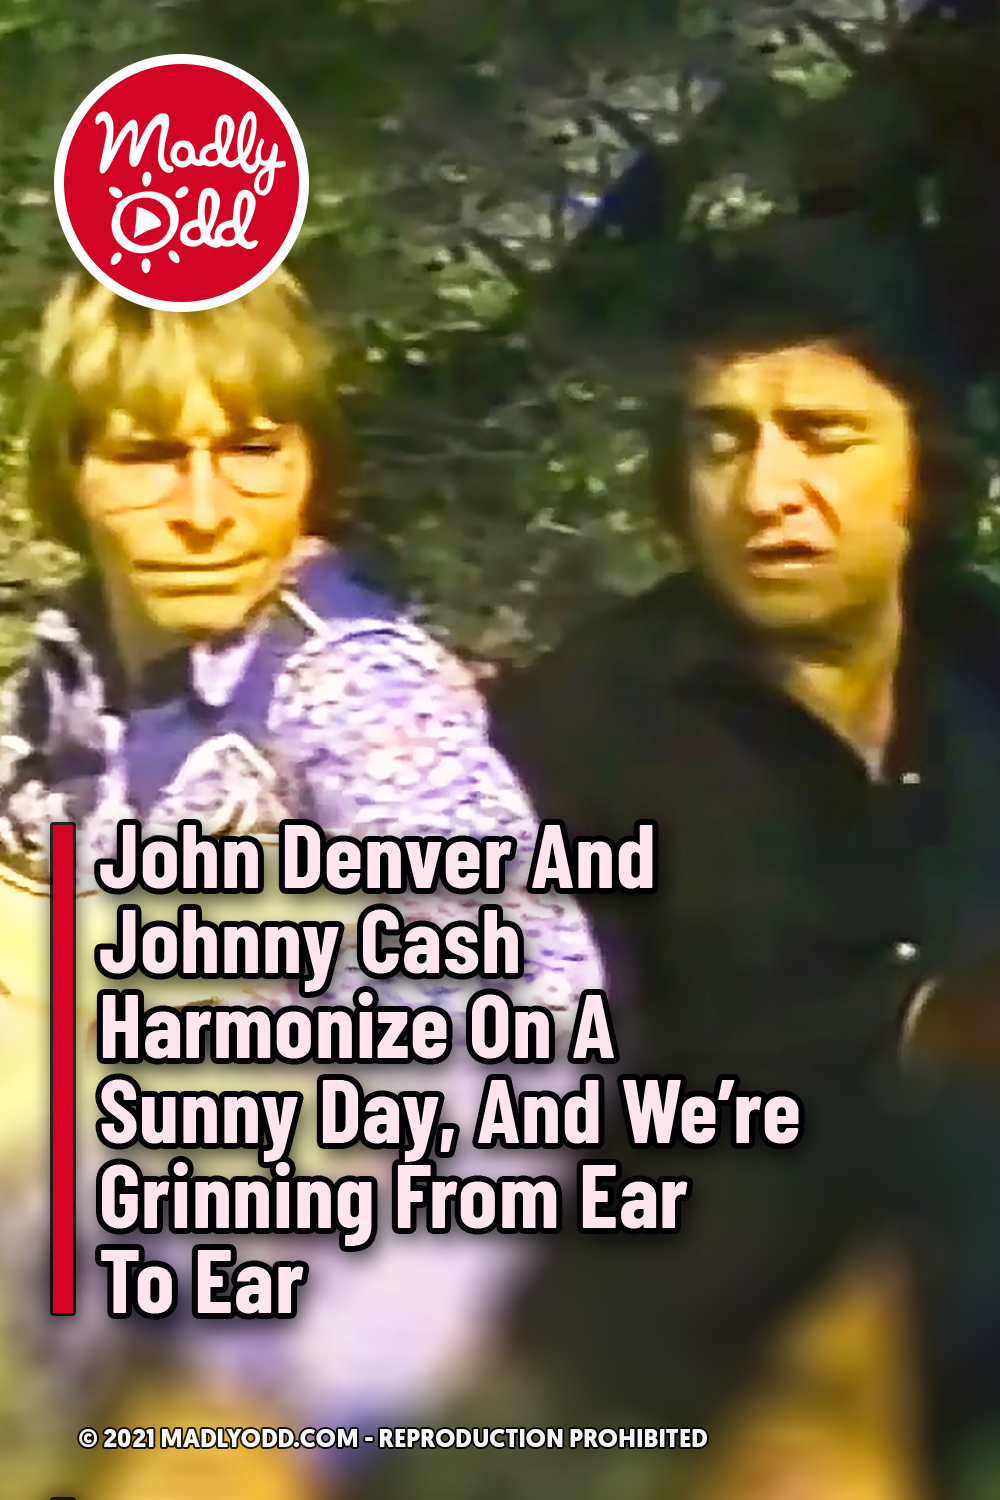 John Denver And Johnny Cash Harmonize On A Sunny Day, And We’re Grinning From Ear To Ear